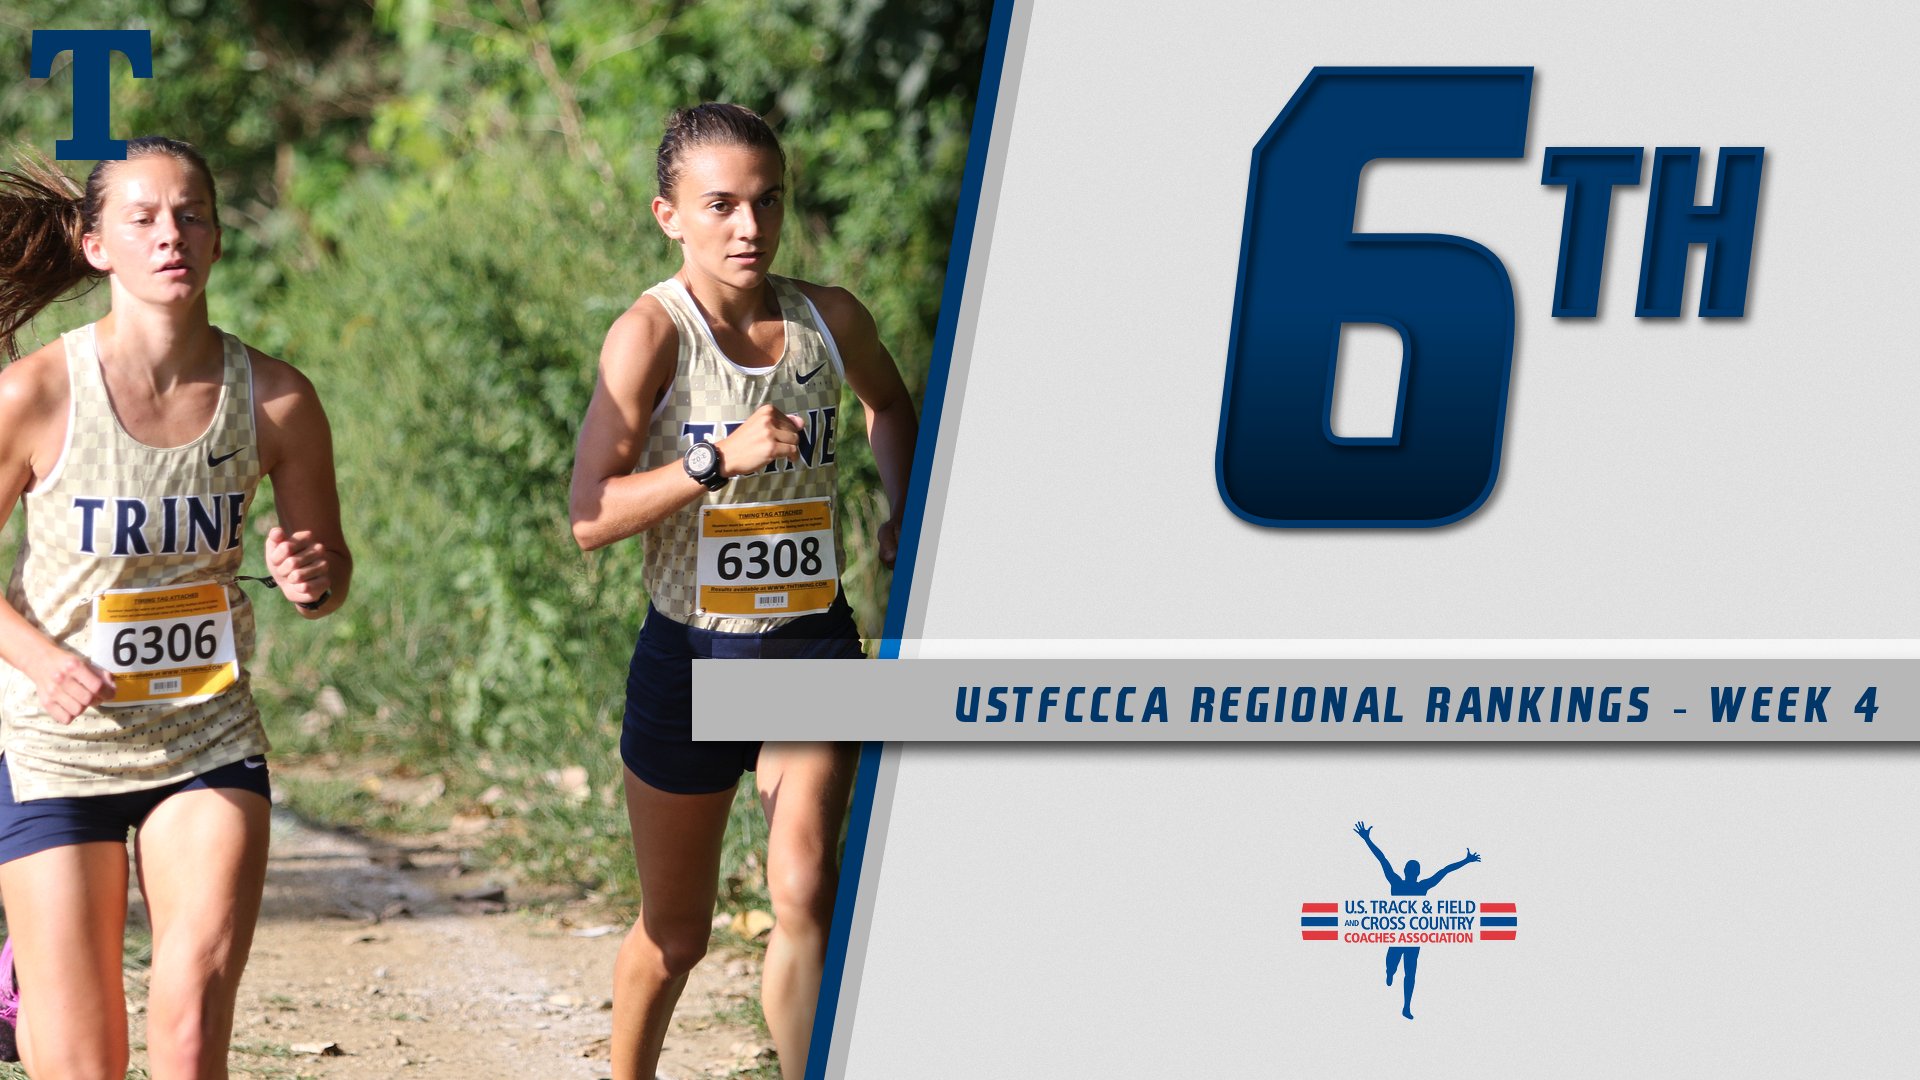 Thunder Hold on to Sixth in USTFCCCA Regional Rankings